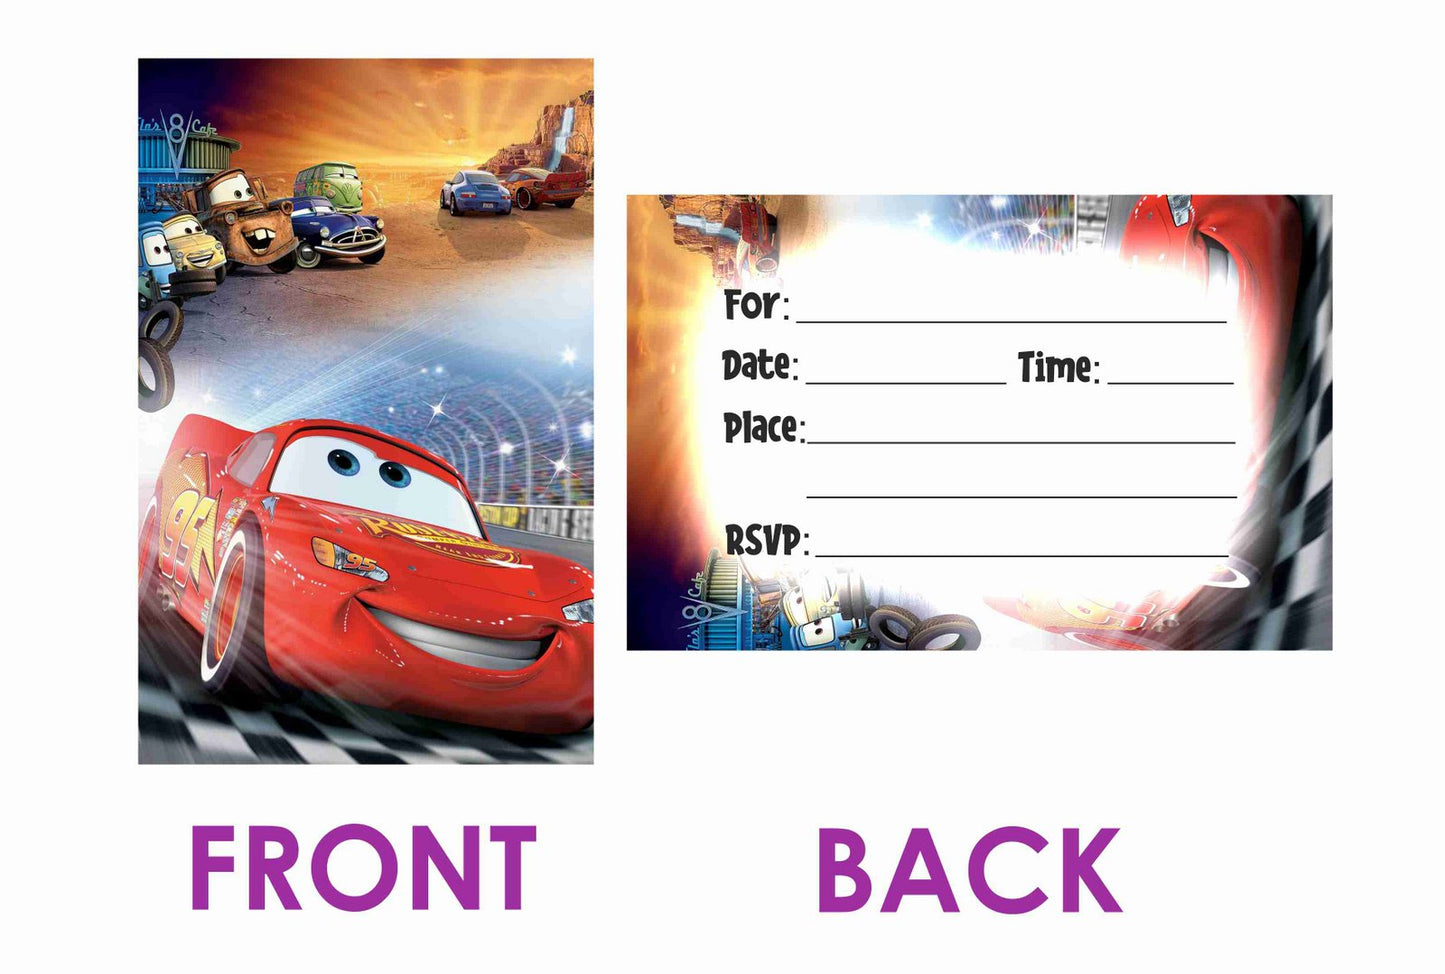 Cars Theme Children's Birthday Party Invitations Cards with Envelopes - Kids Birthday Party Invitations for Boys or Girls,- Invitation Cards (Pack of 10)